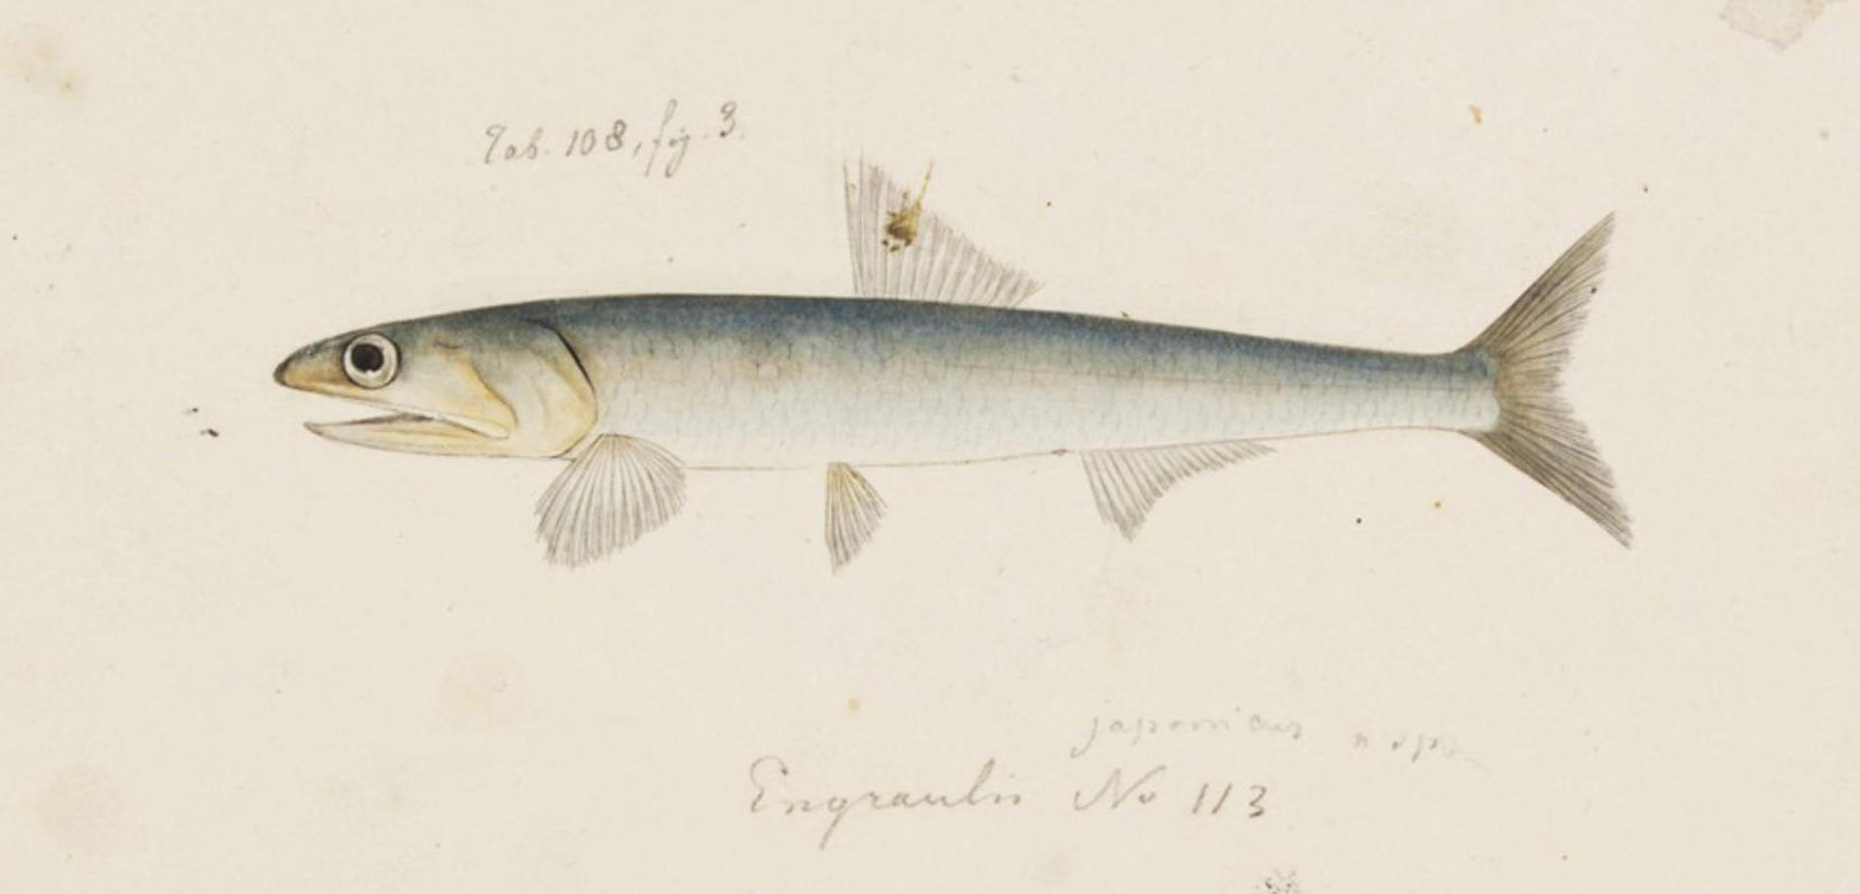 A portrait of a Japanese anchovy by Japanese artist Kawahara Keiga from the 1820s